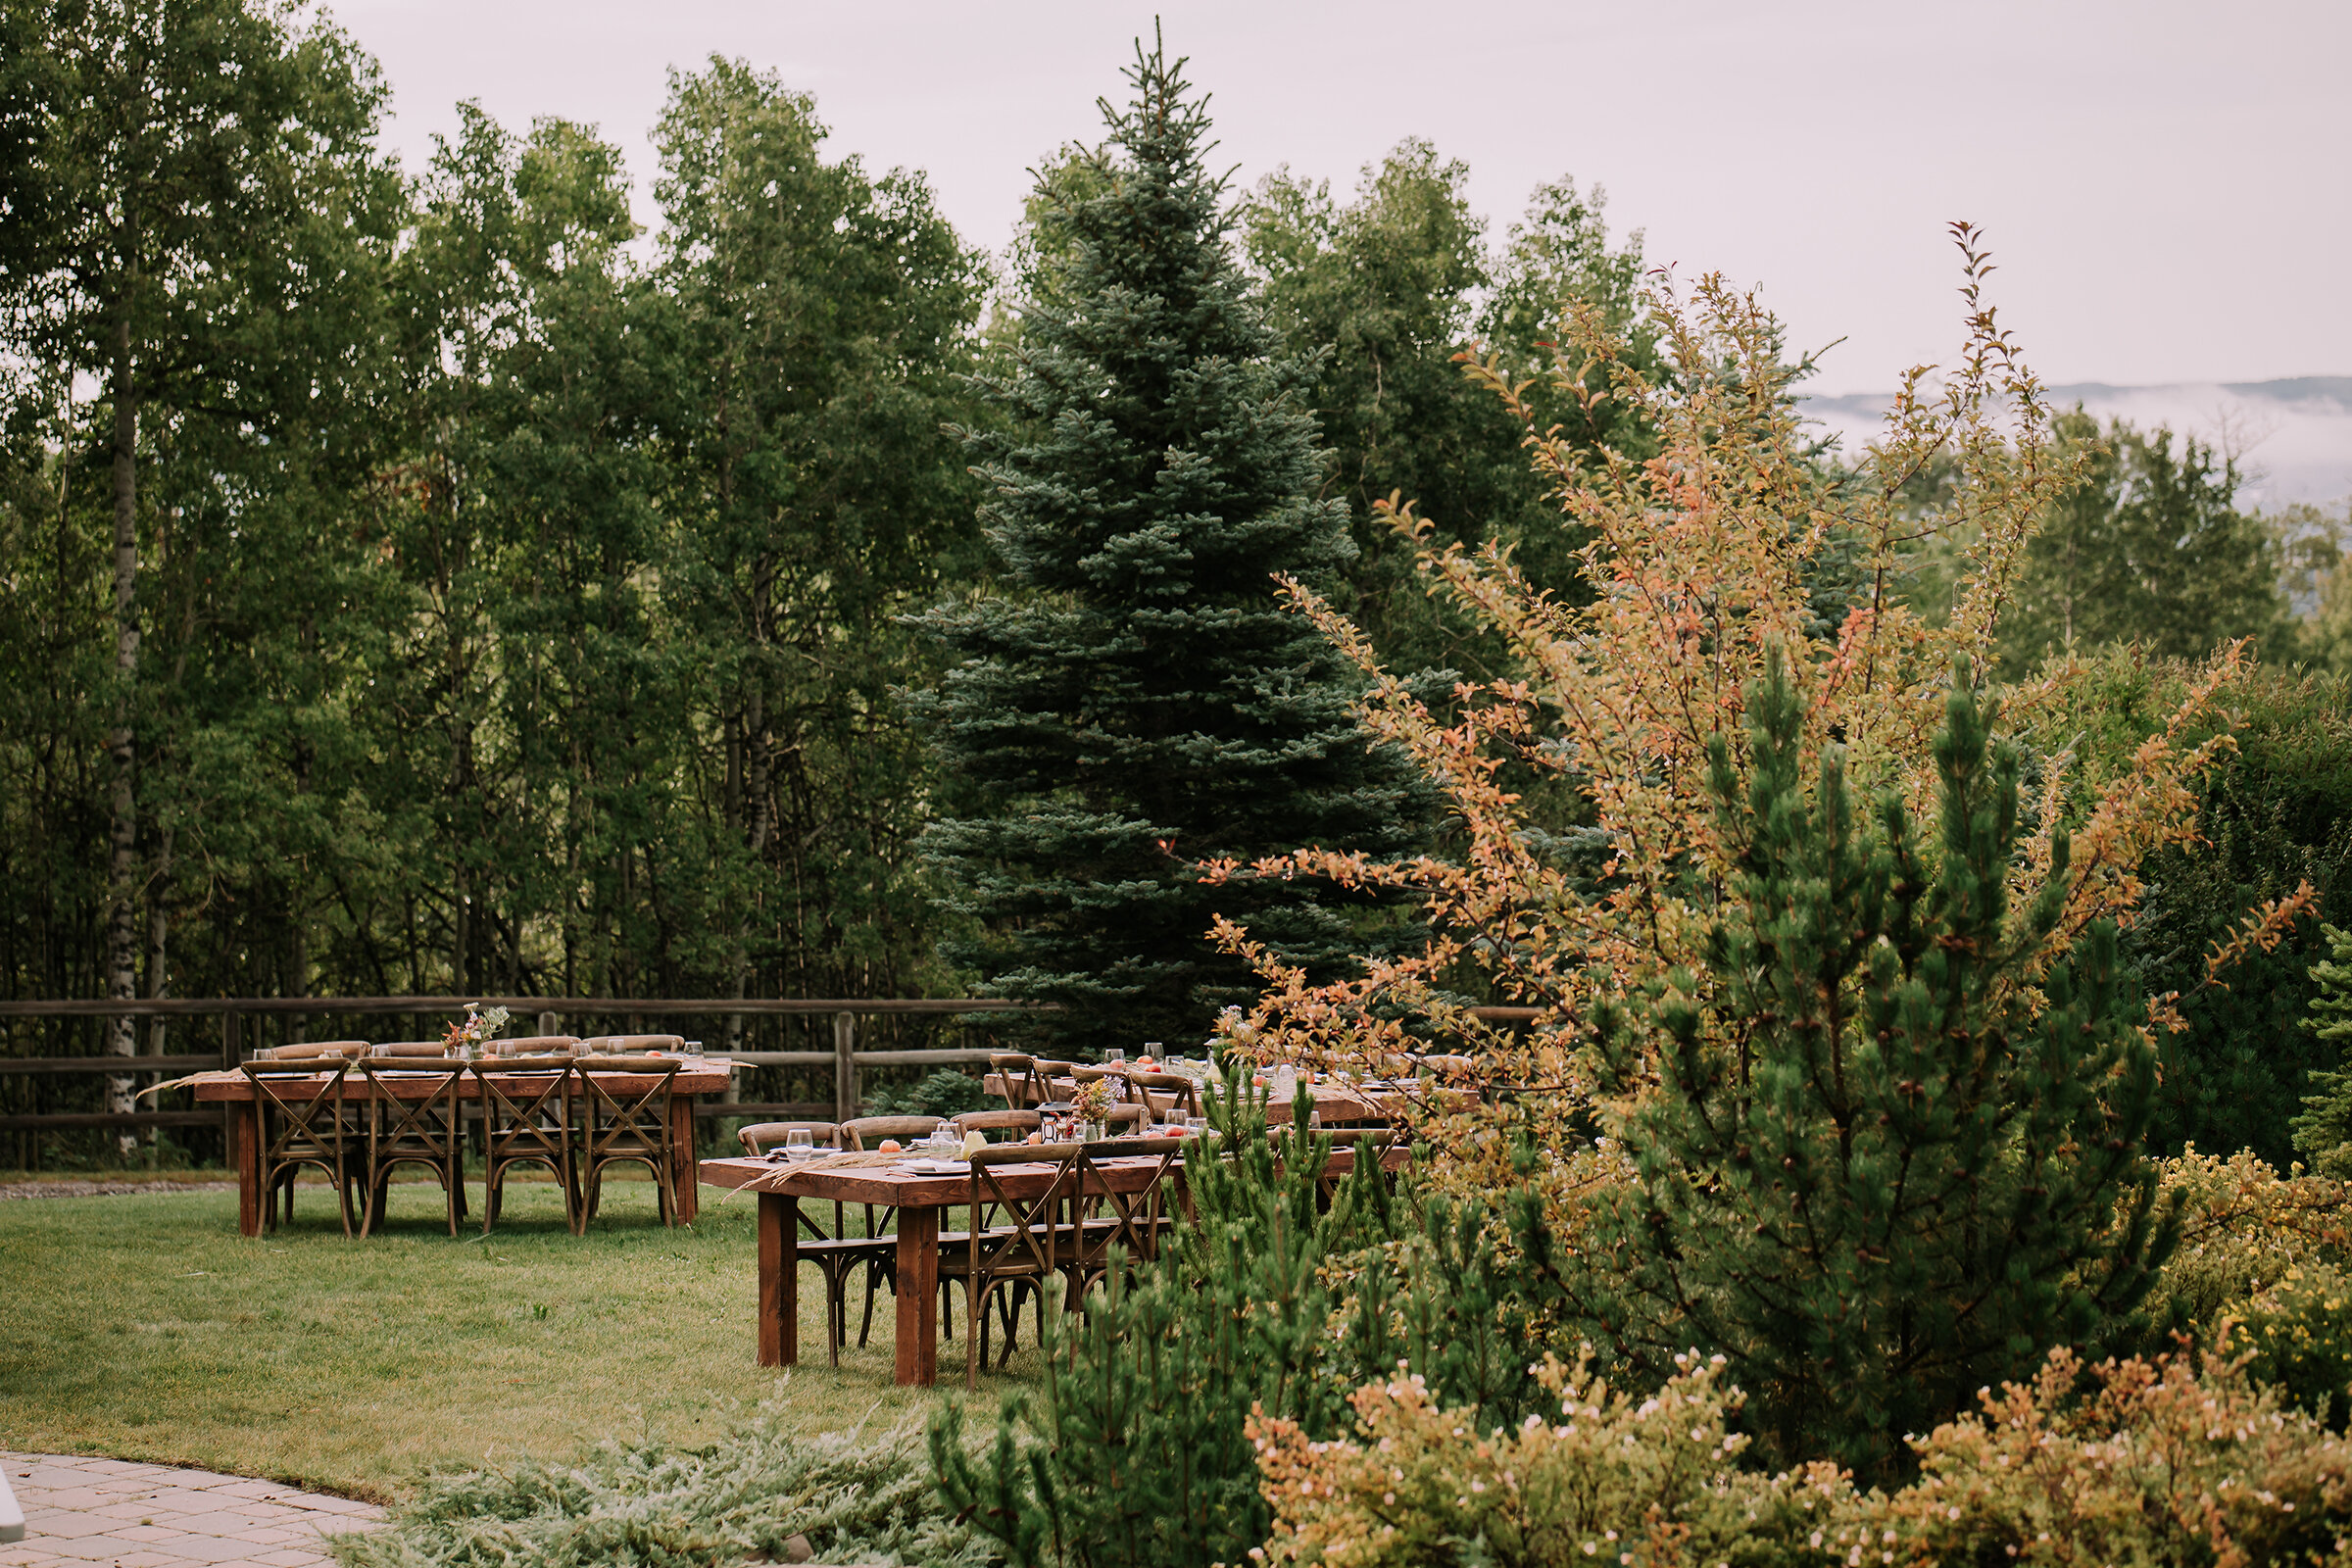 This Unconventional Farm Wedding Breaks All the Rules and We Love it // Mark & Saphron - on the Bronte Bride Blog